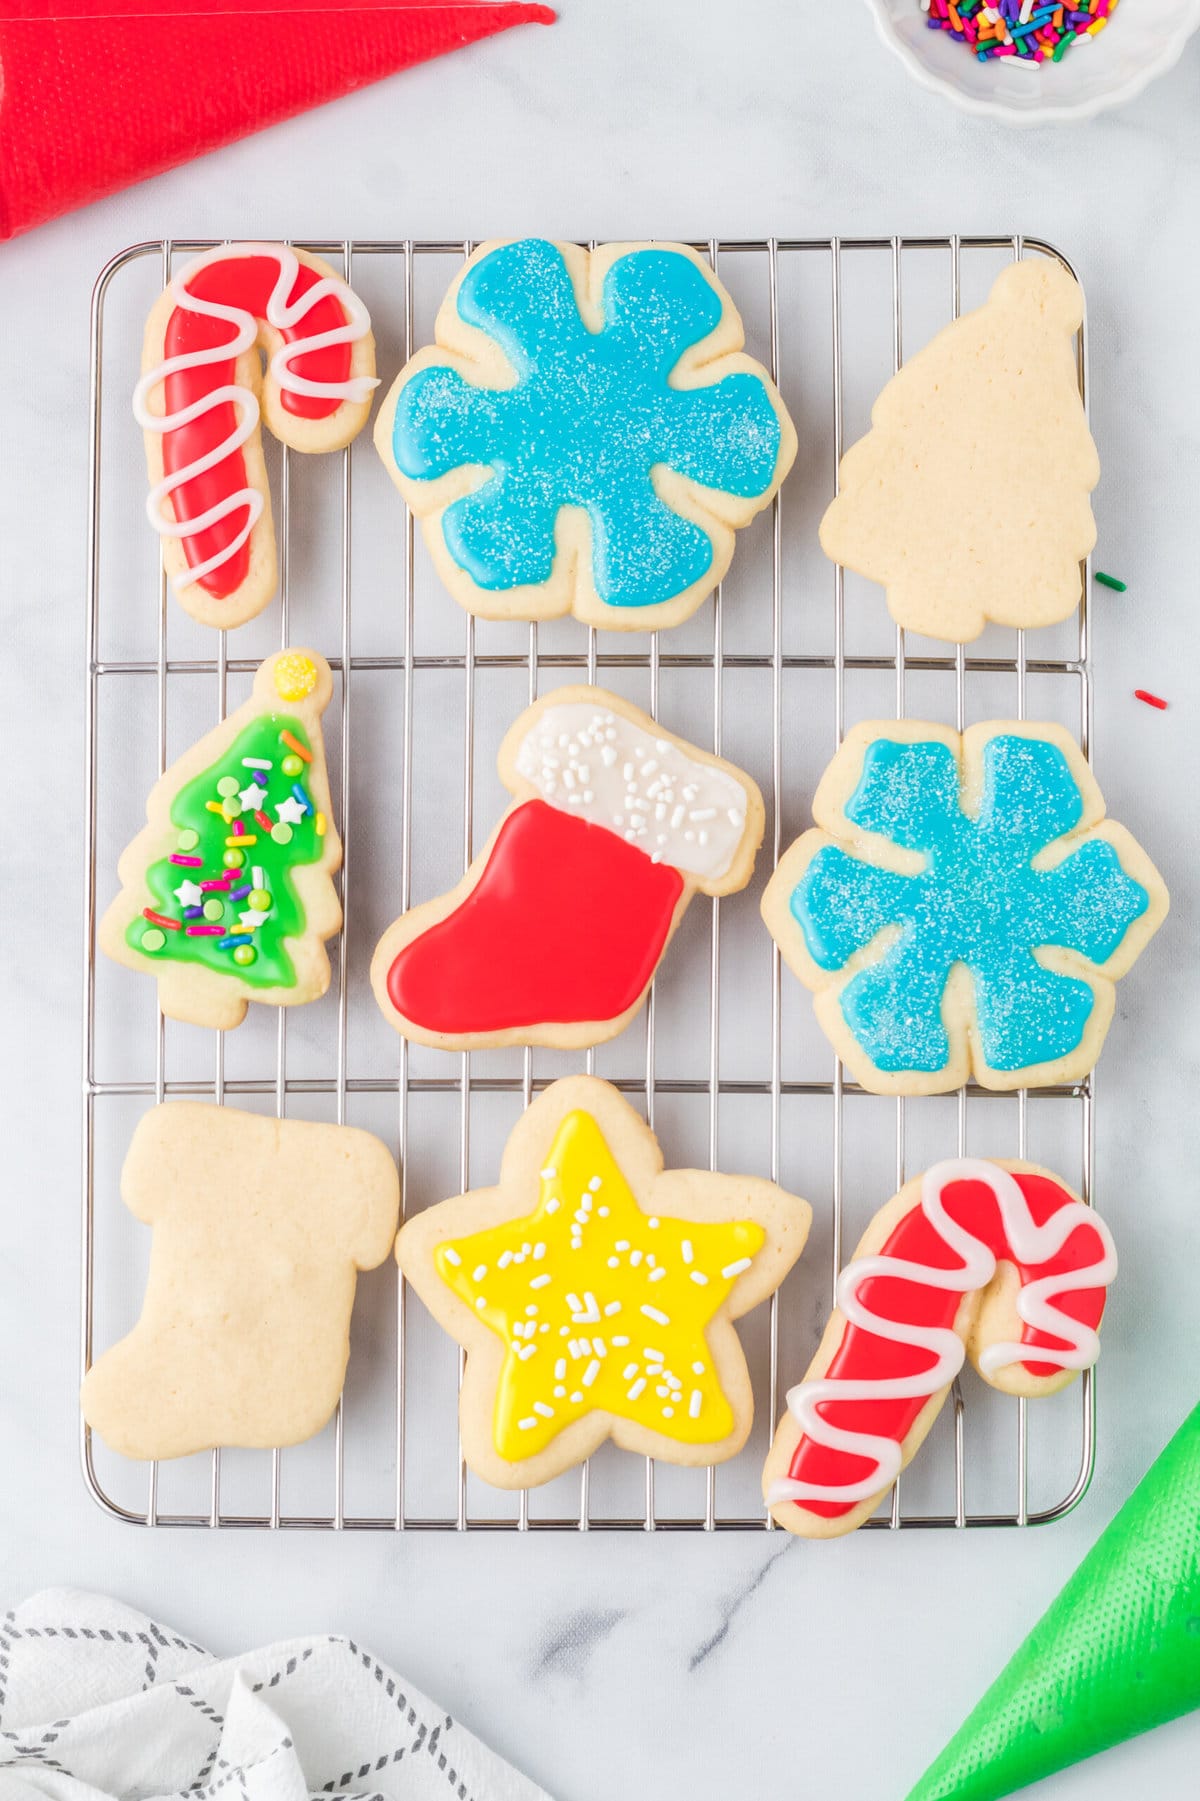 The decorated cookies on a rack.